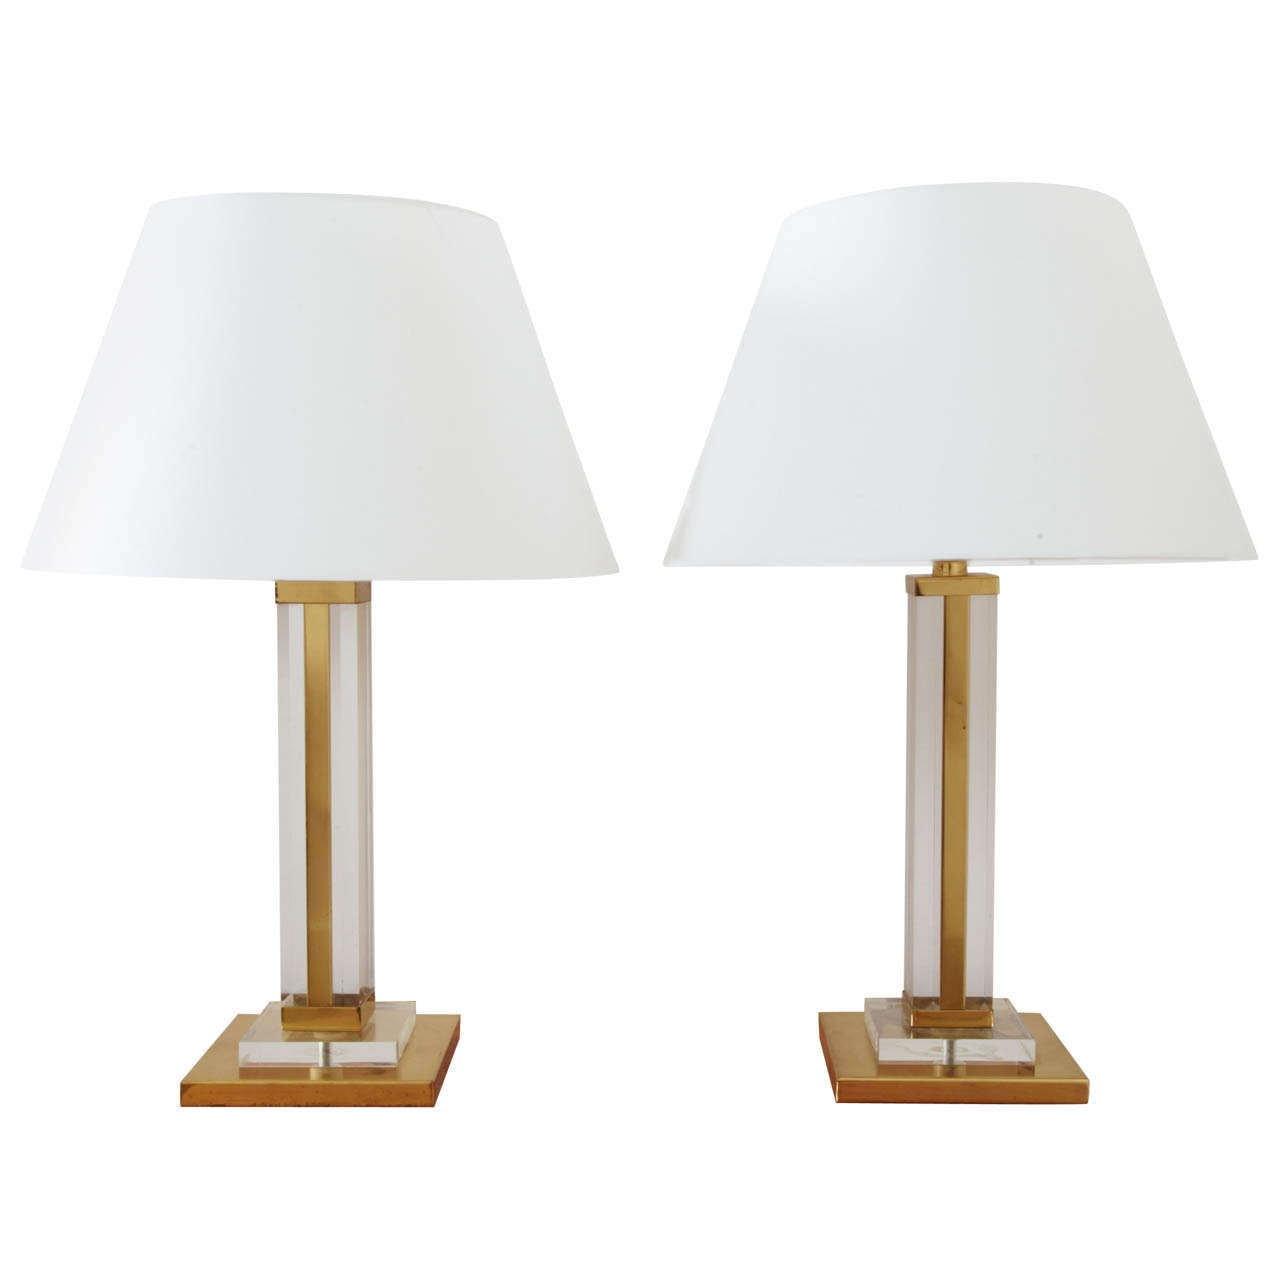 Pair Of Gilt Brass And Lucite Square Table Lamps, France 1970's For Sale